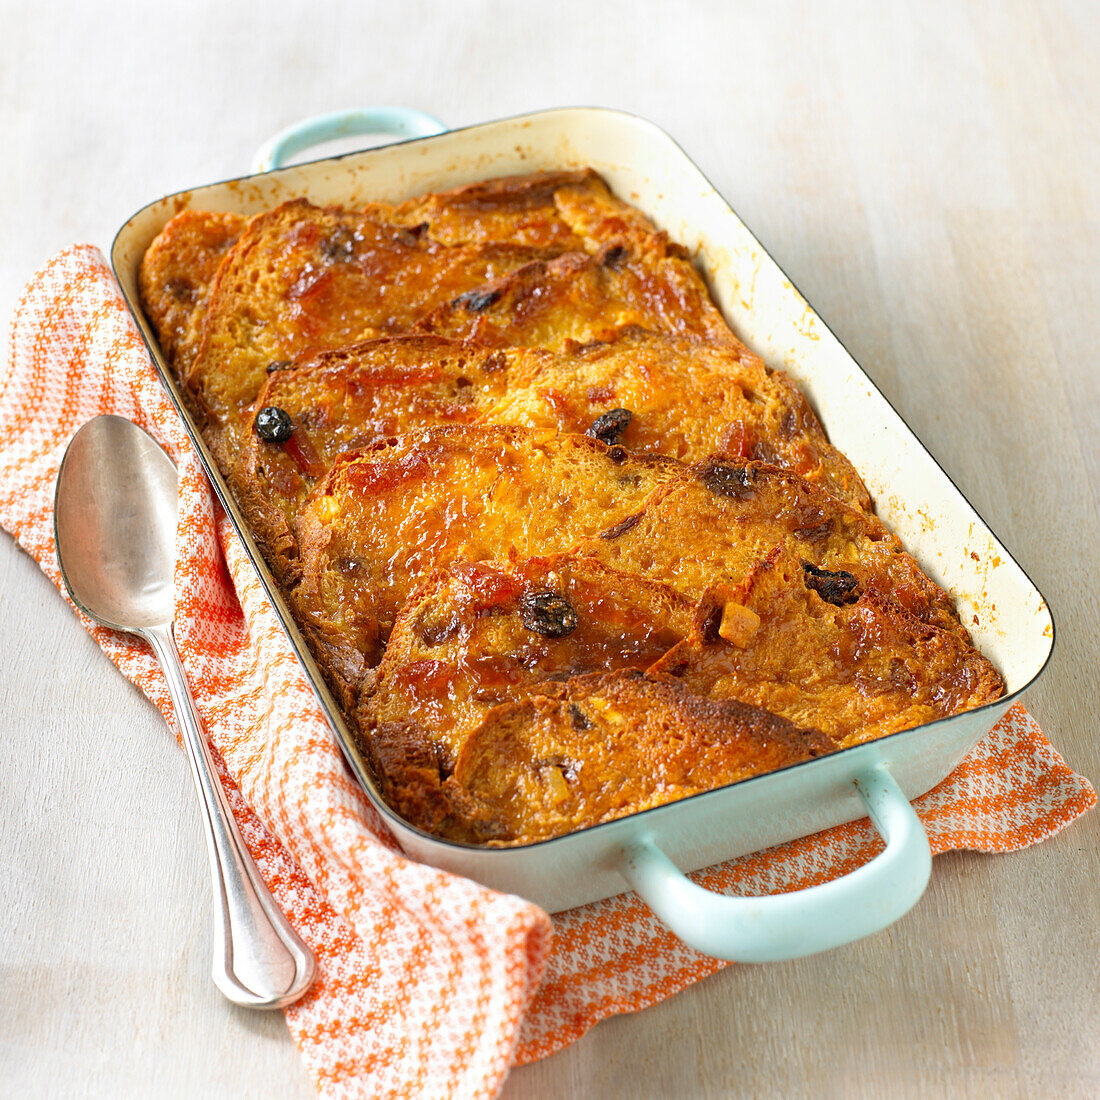 Baked panettone and marmalade pudding